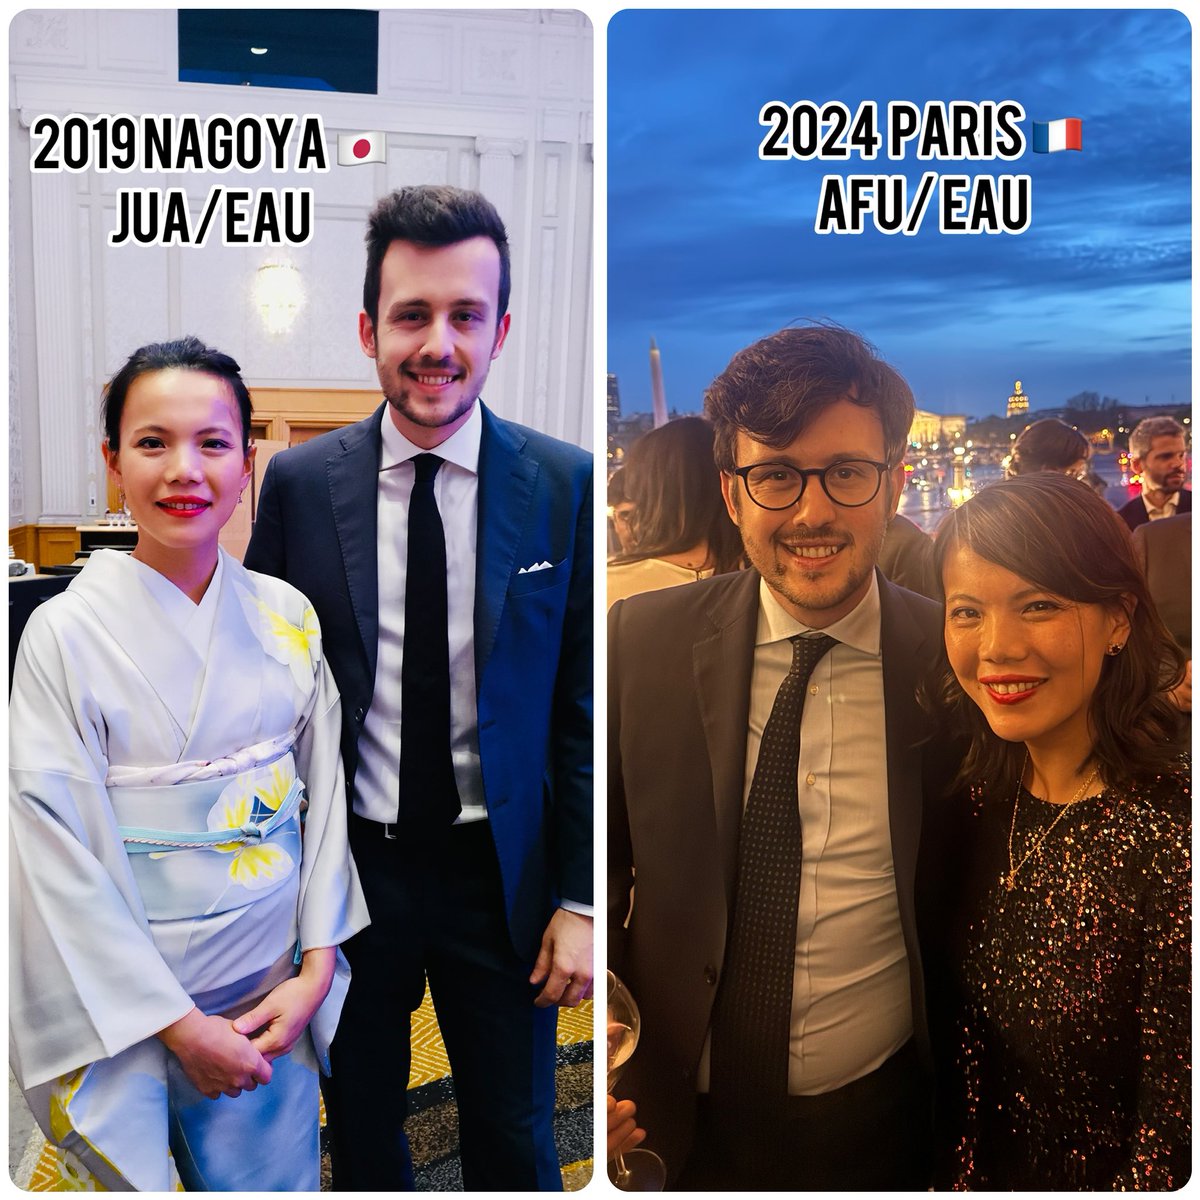 #EAU24 ✈️Time flies… ❤️With @UroMoschini 🇯🇵First met in Tokyo, then became friends. 🌍Evolving each in Italy @SanRaffaeleMI & France @Sorbonne_Univ_ 🇫🇷Now gathered 5 years later in Paris 🙏Thanks to @Uroweb @AFUrologie ✨The magic offered by #urology @EAUYAUrology